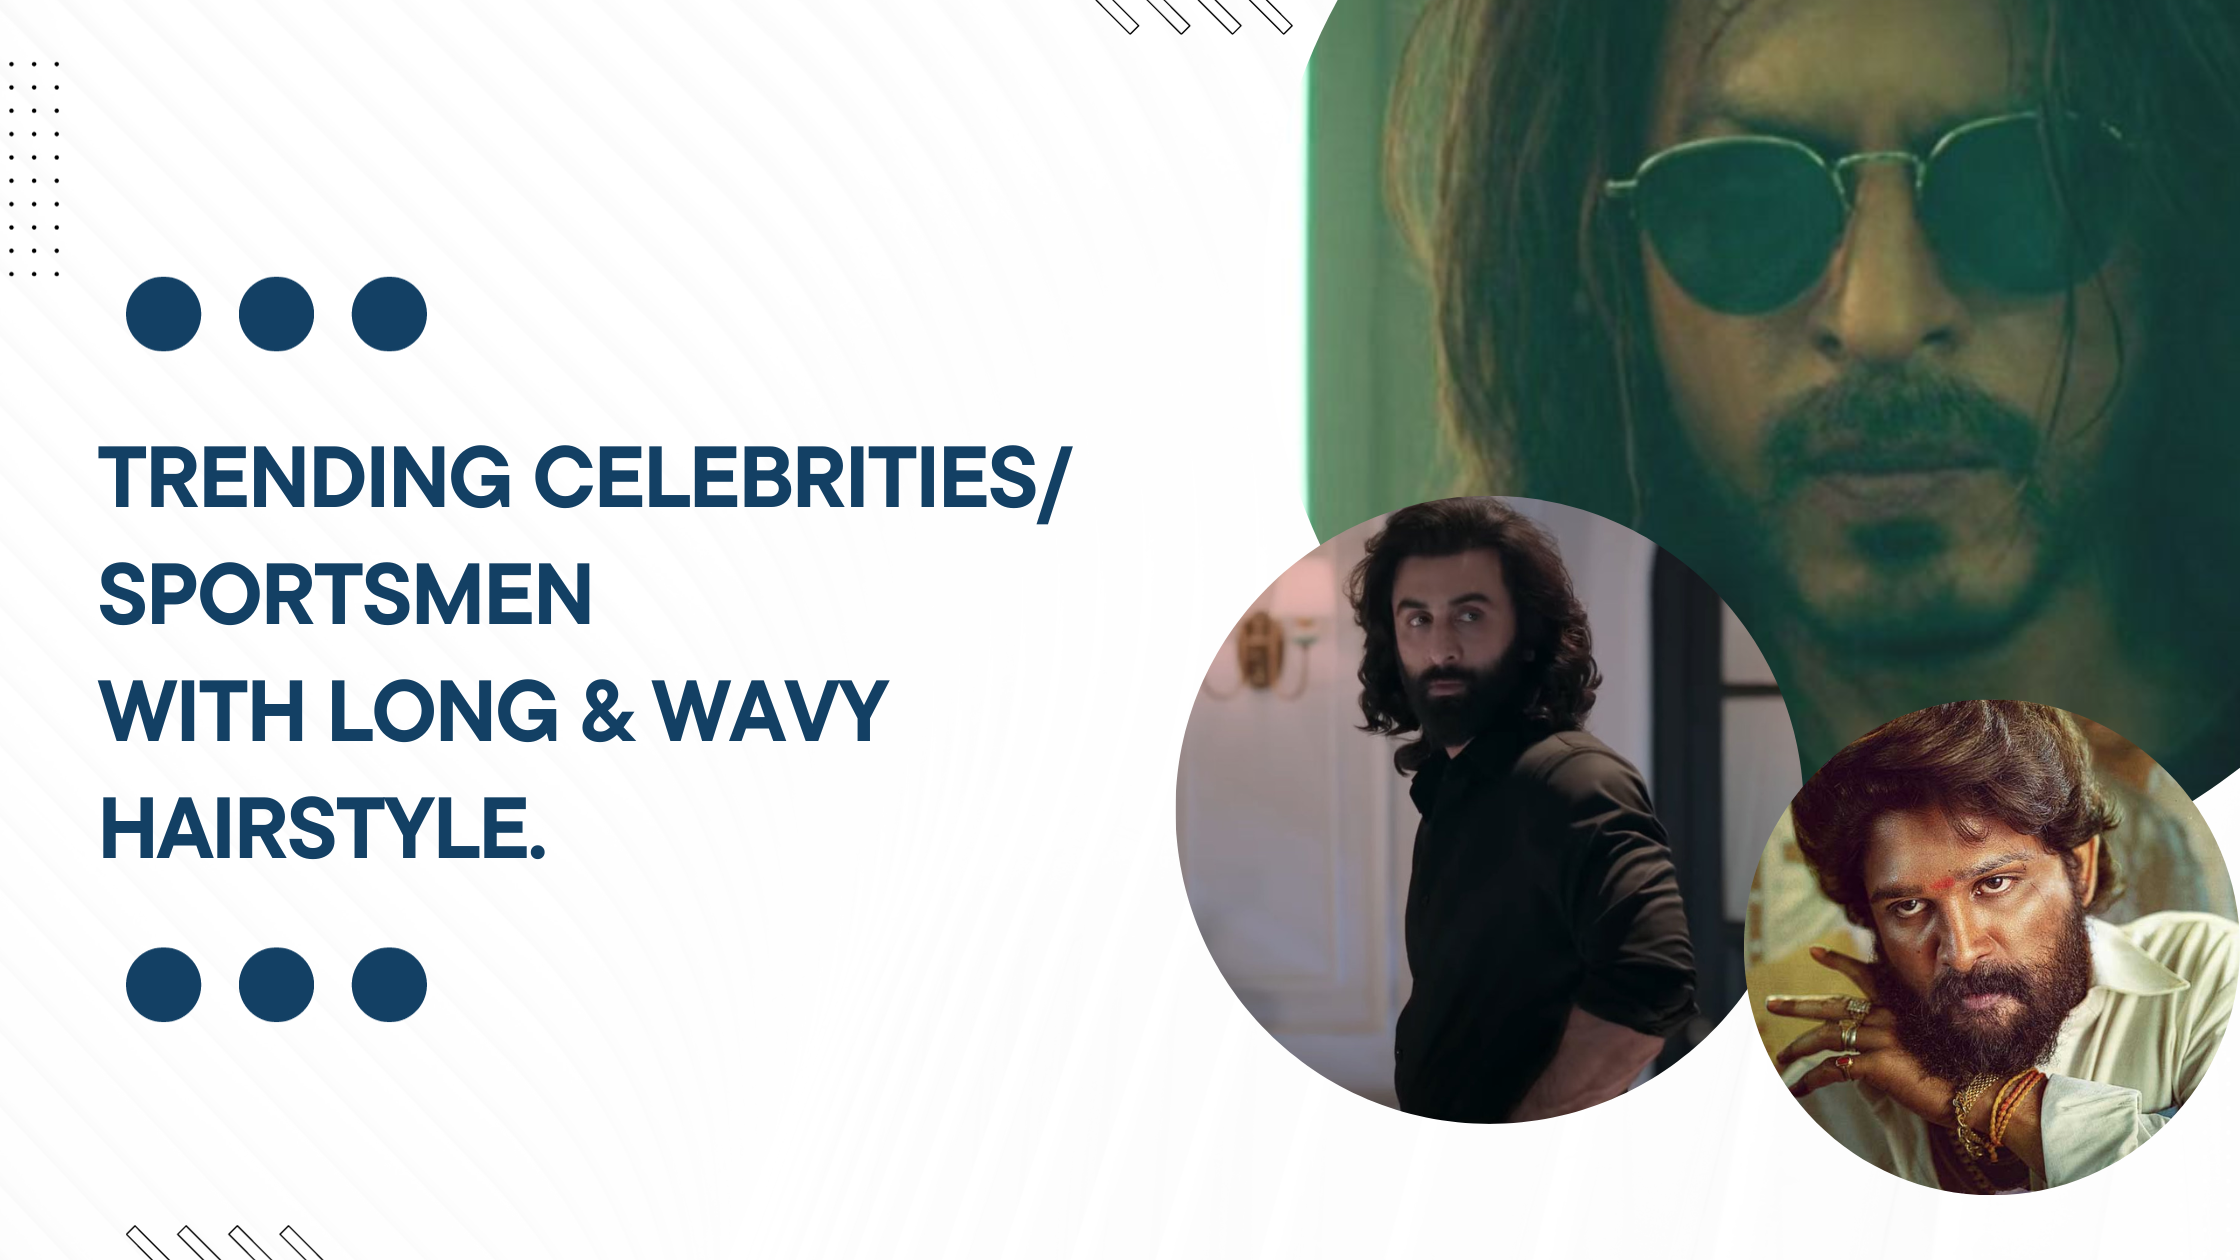 8 Indian celebrities that will give you some serious beard goals